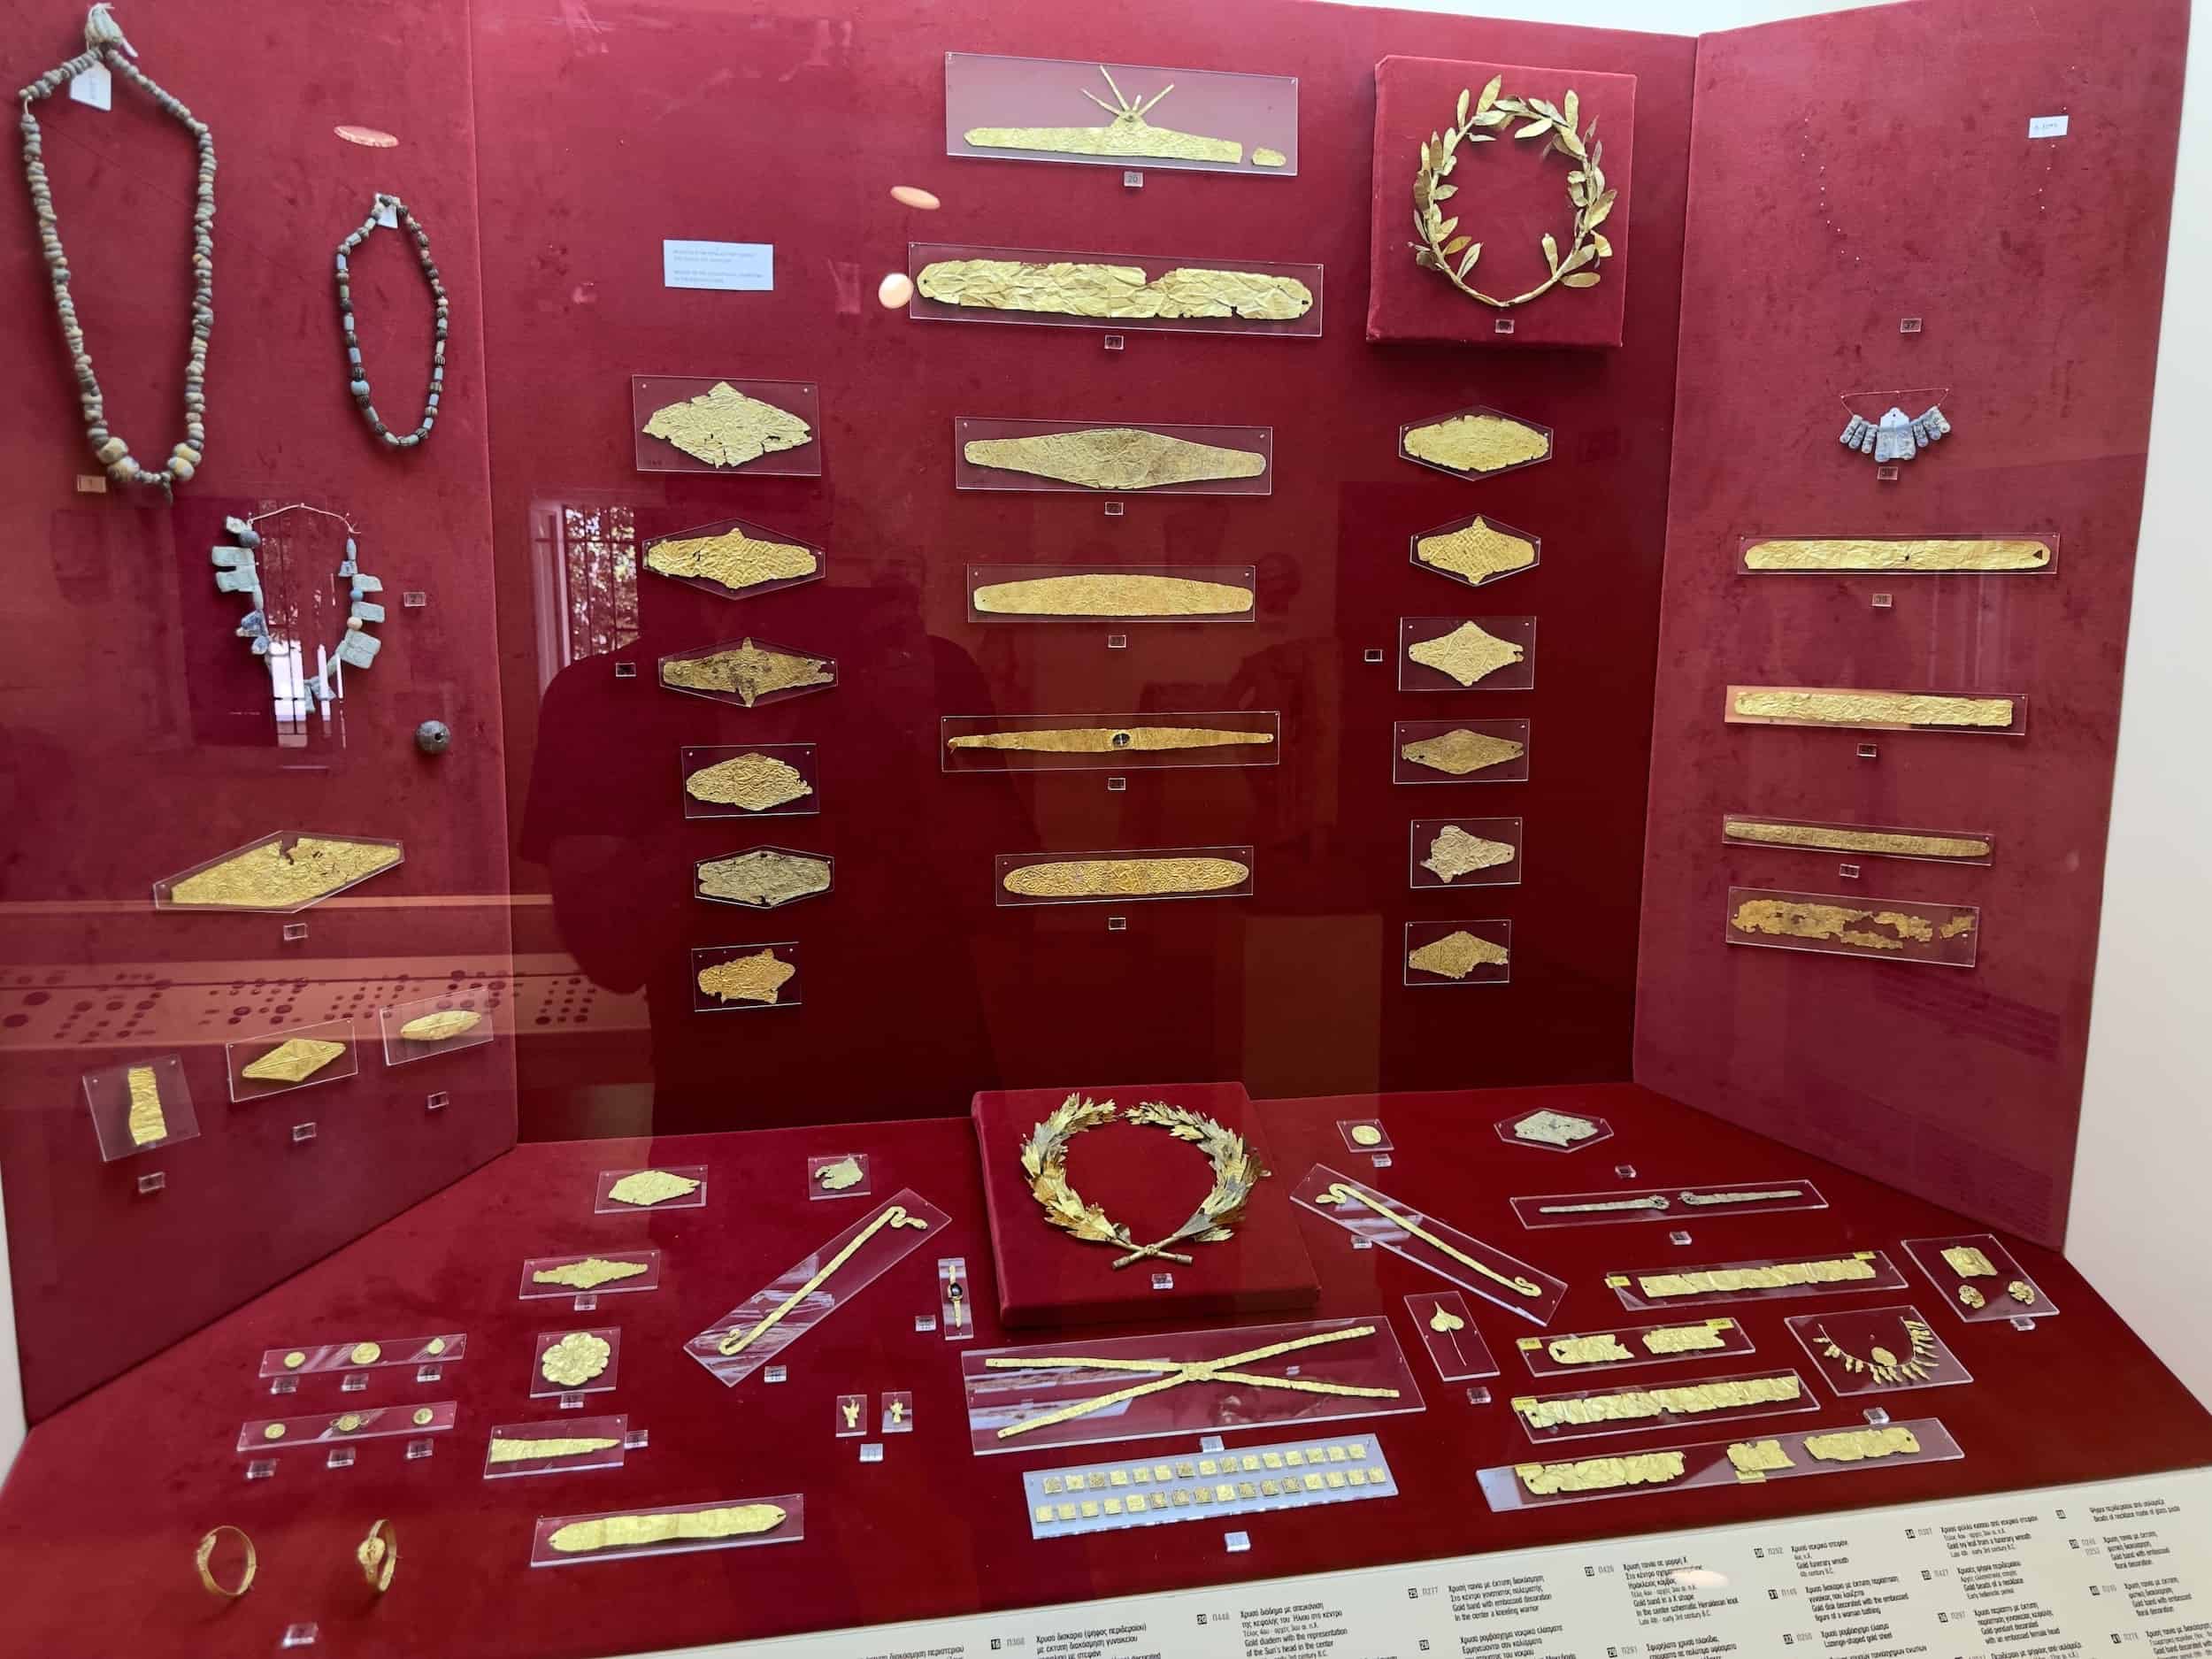 Funerary jewelry at the Canellopoulos Museum in Athens, Greece